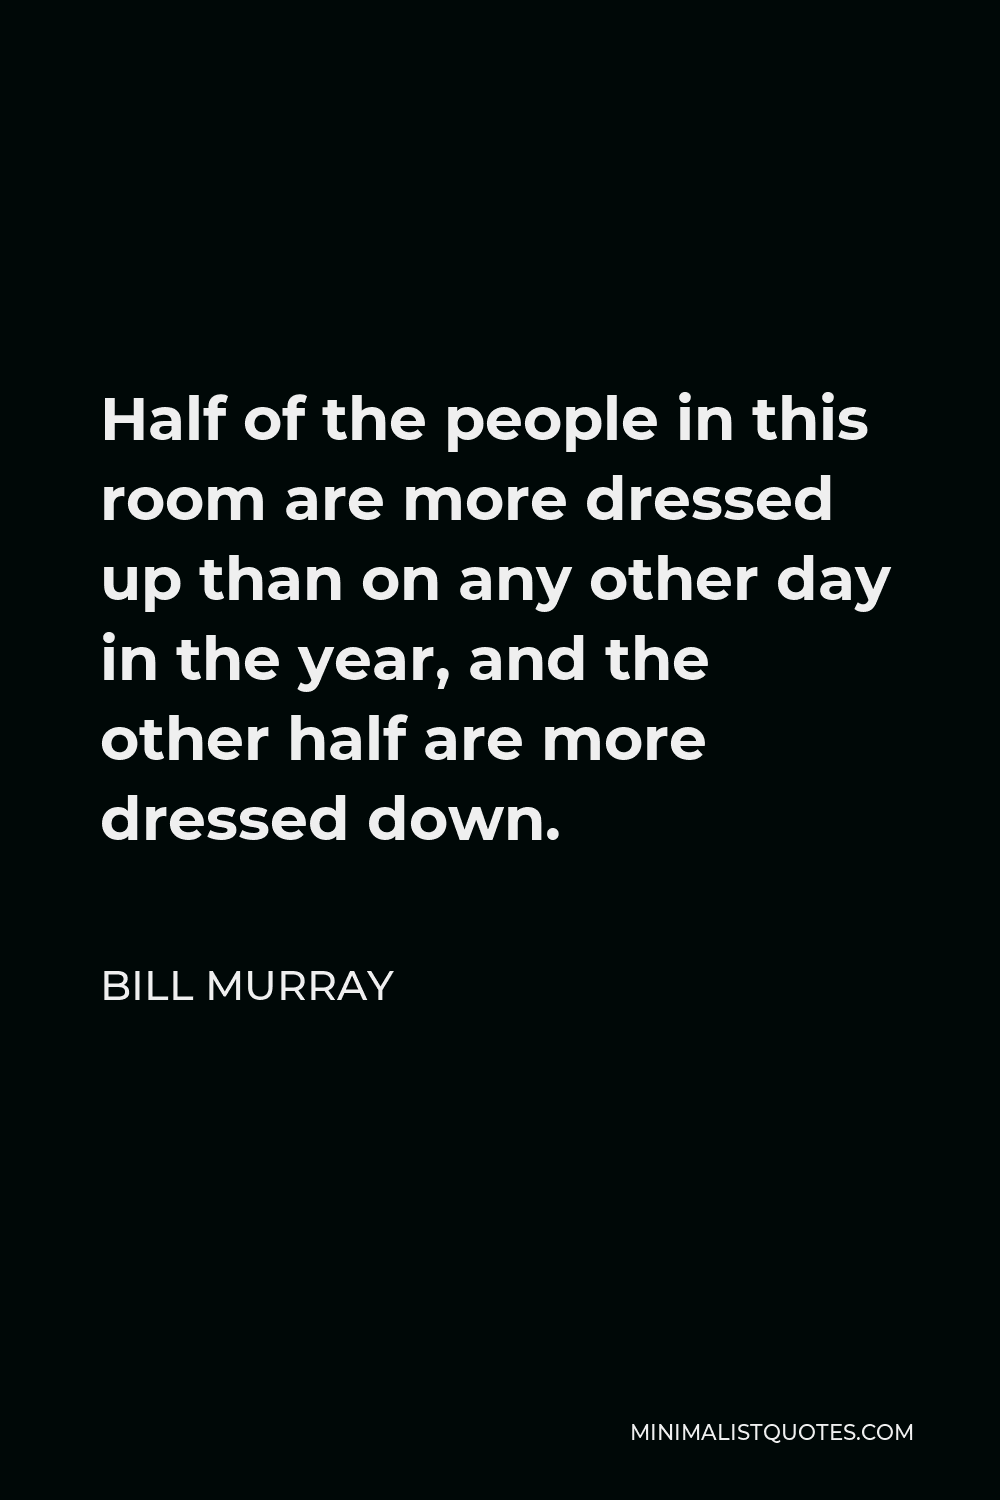 Bill Murray Quote - Half of the people in this room are more dressed up than on any other day in the year, and the other half are more dressed down.